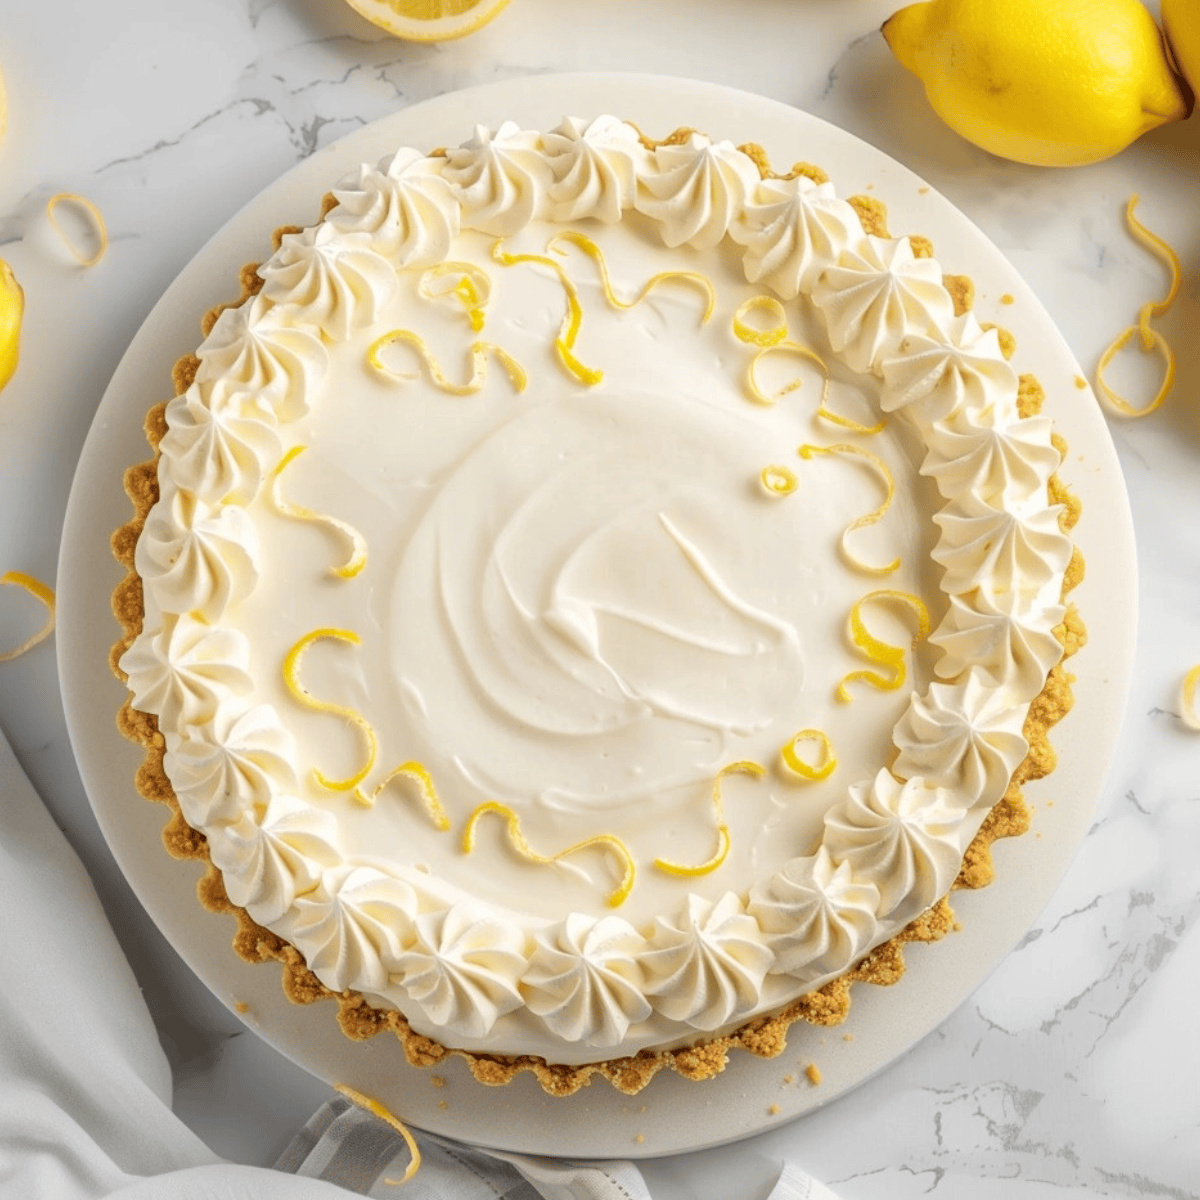 Whole Cream Cheese Lemonade Pie garnished with lemon zest in a cake tray.